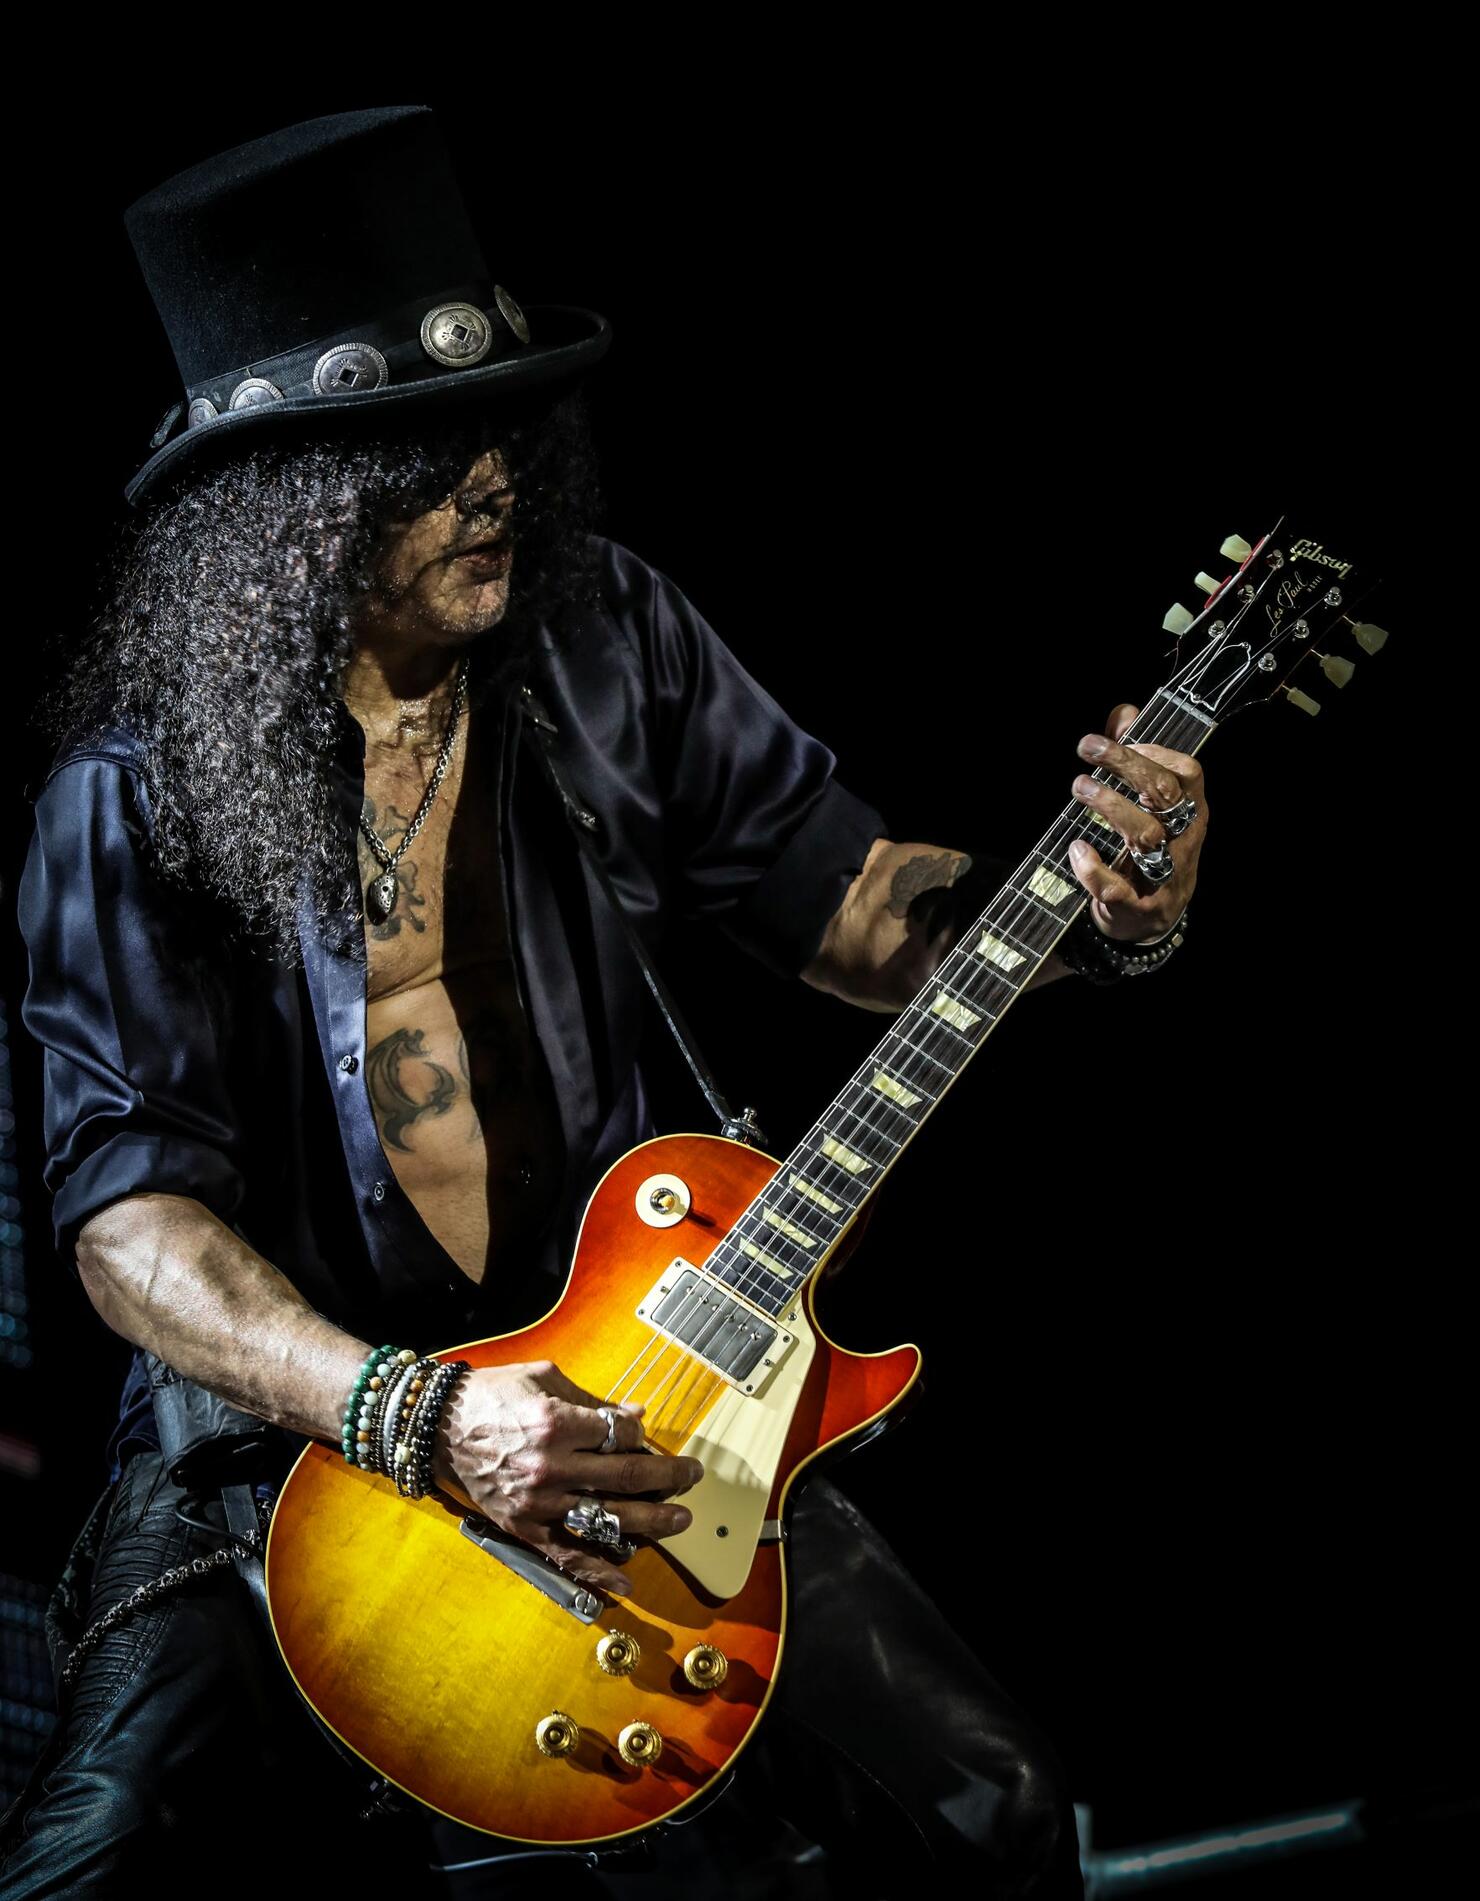 Slash performing with a '59 reissue Les Paul